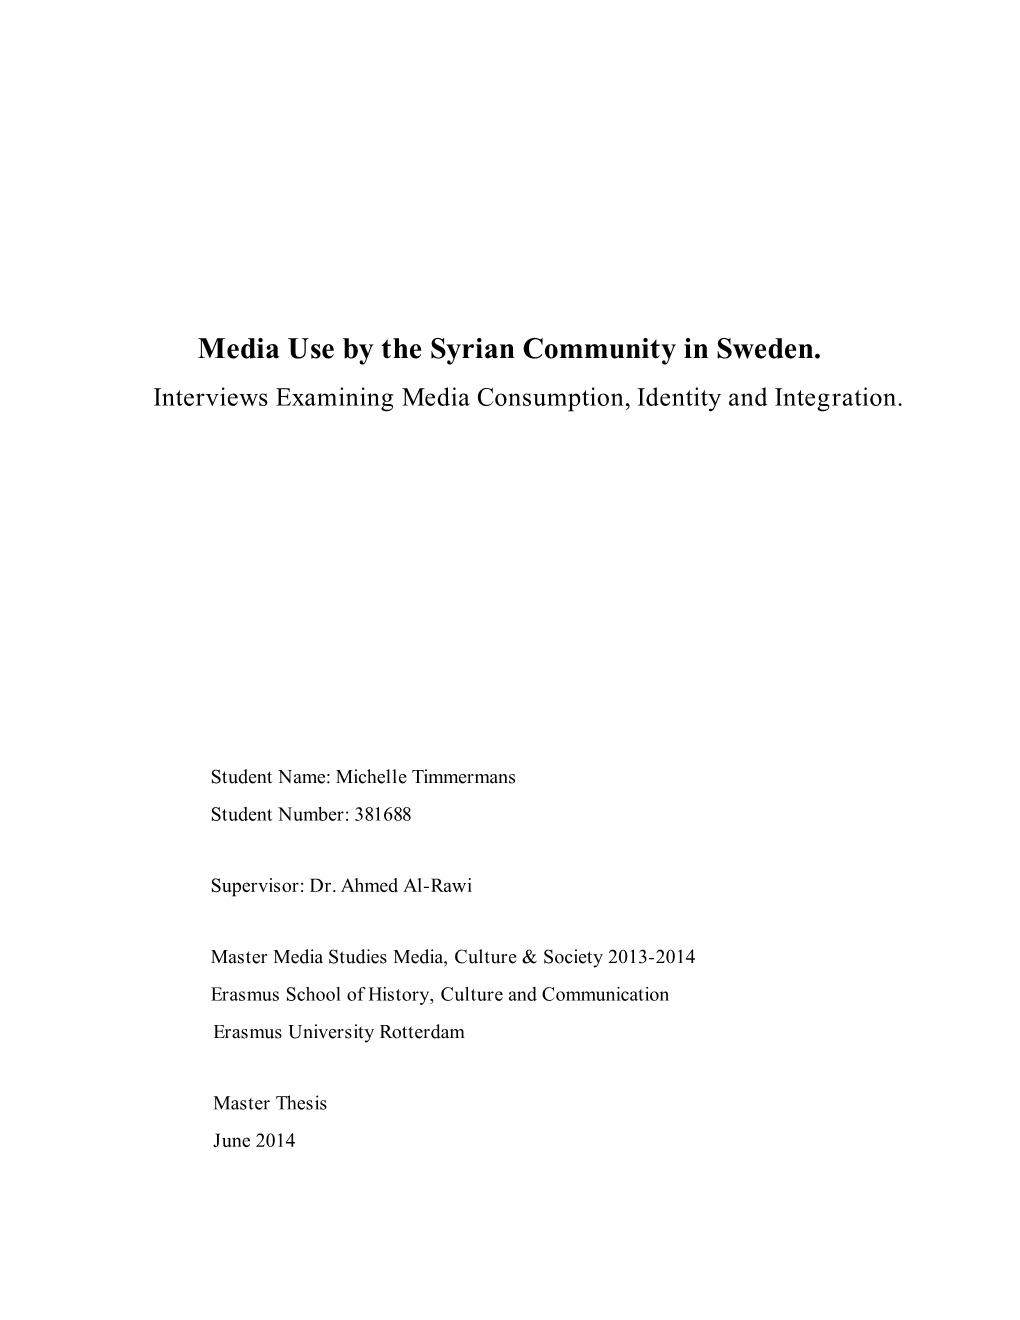 Media Use by the Syrian Community in Sweden